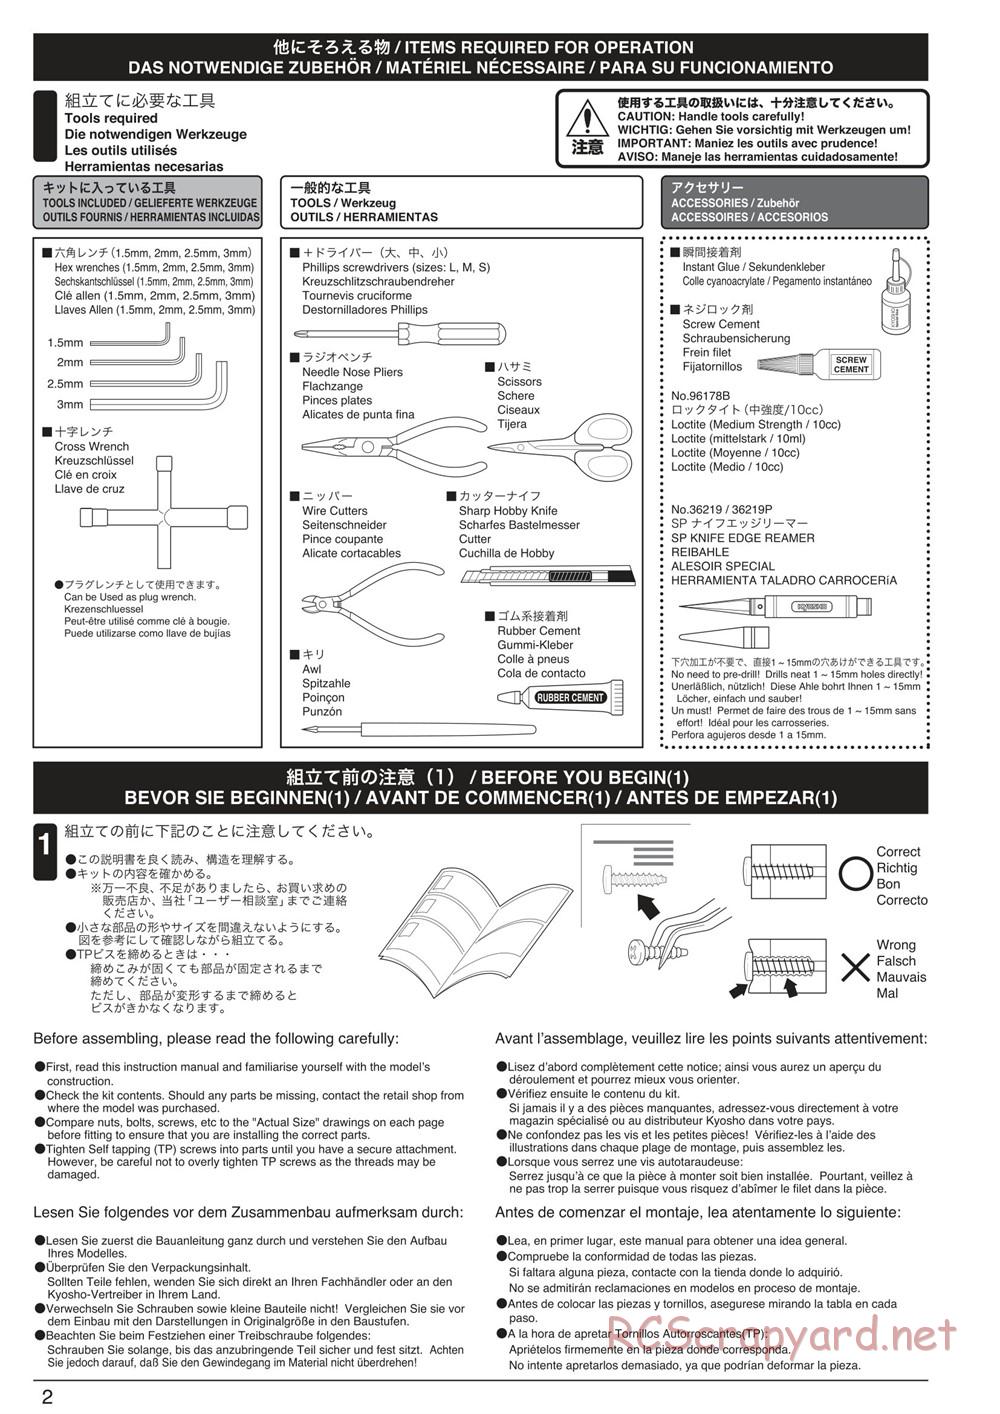 Kyosho - Inferno Neo ST 3.0 - Manual - Page 2